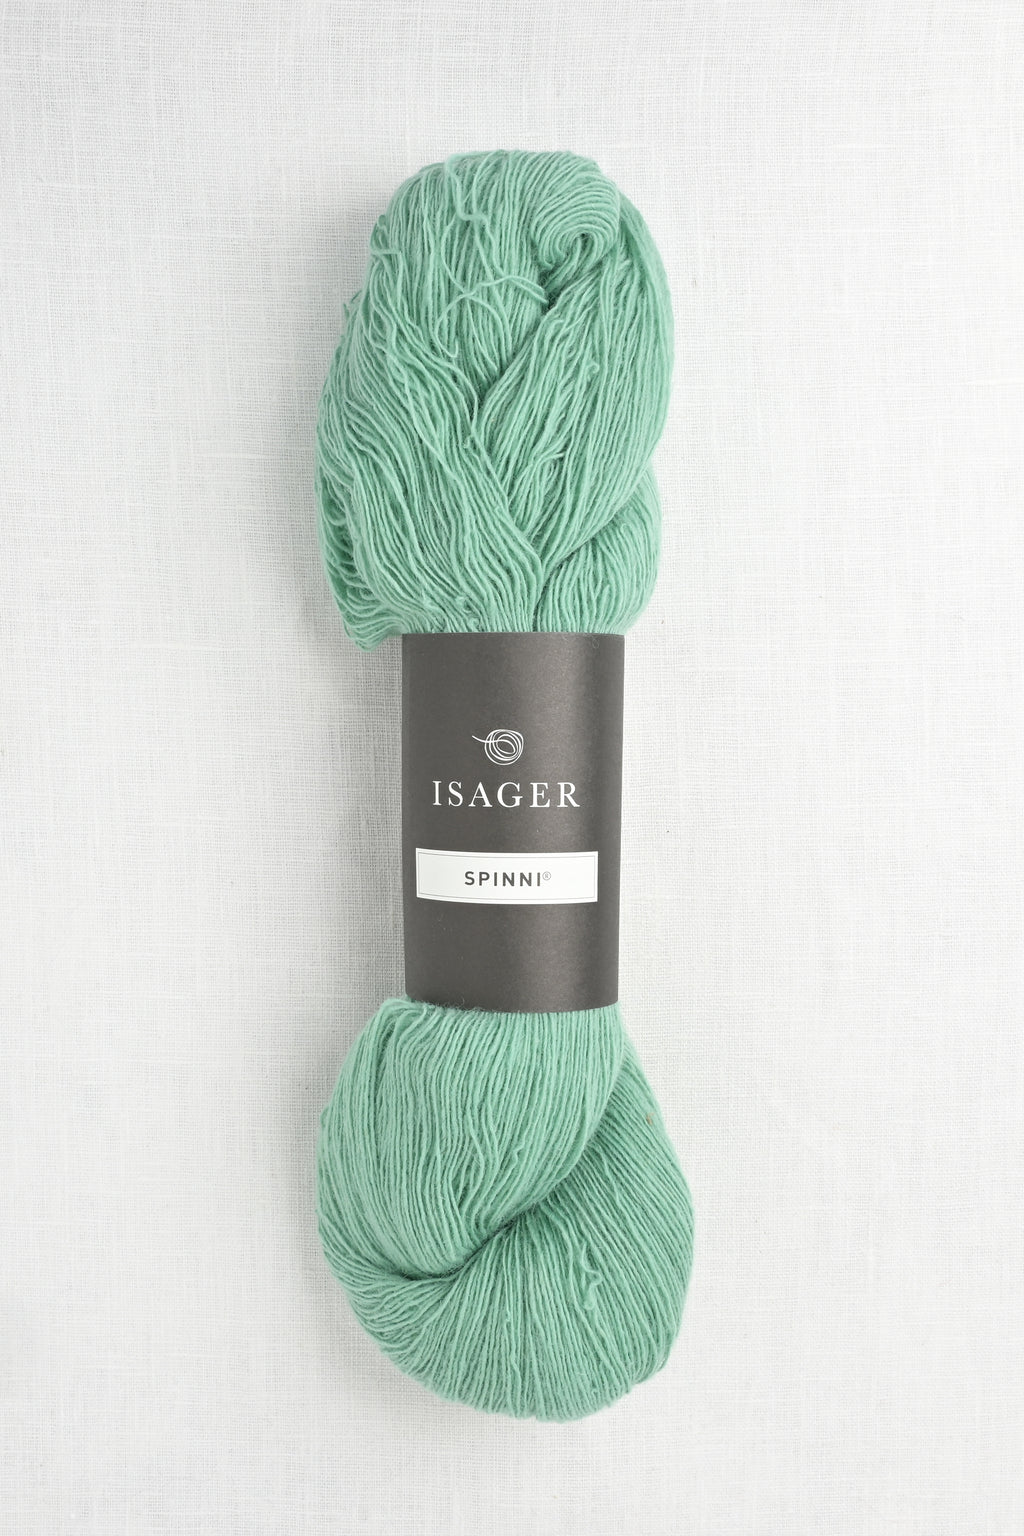 isager spinni 46 mint 100g